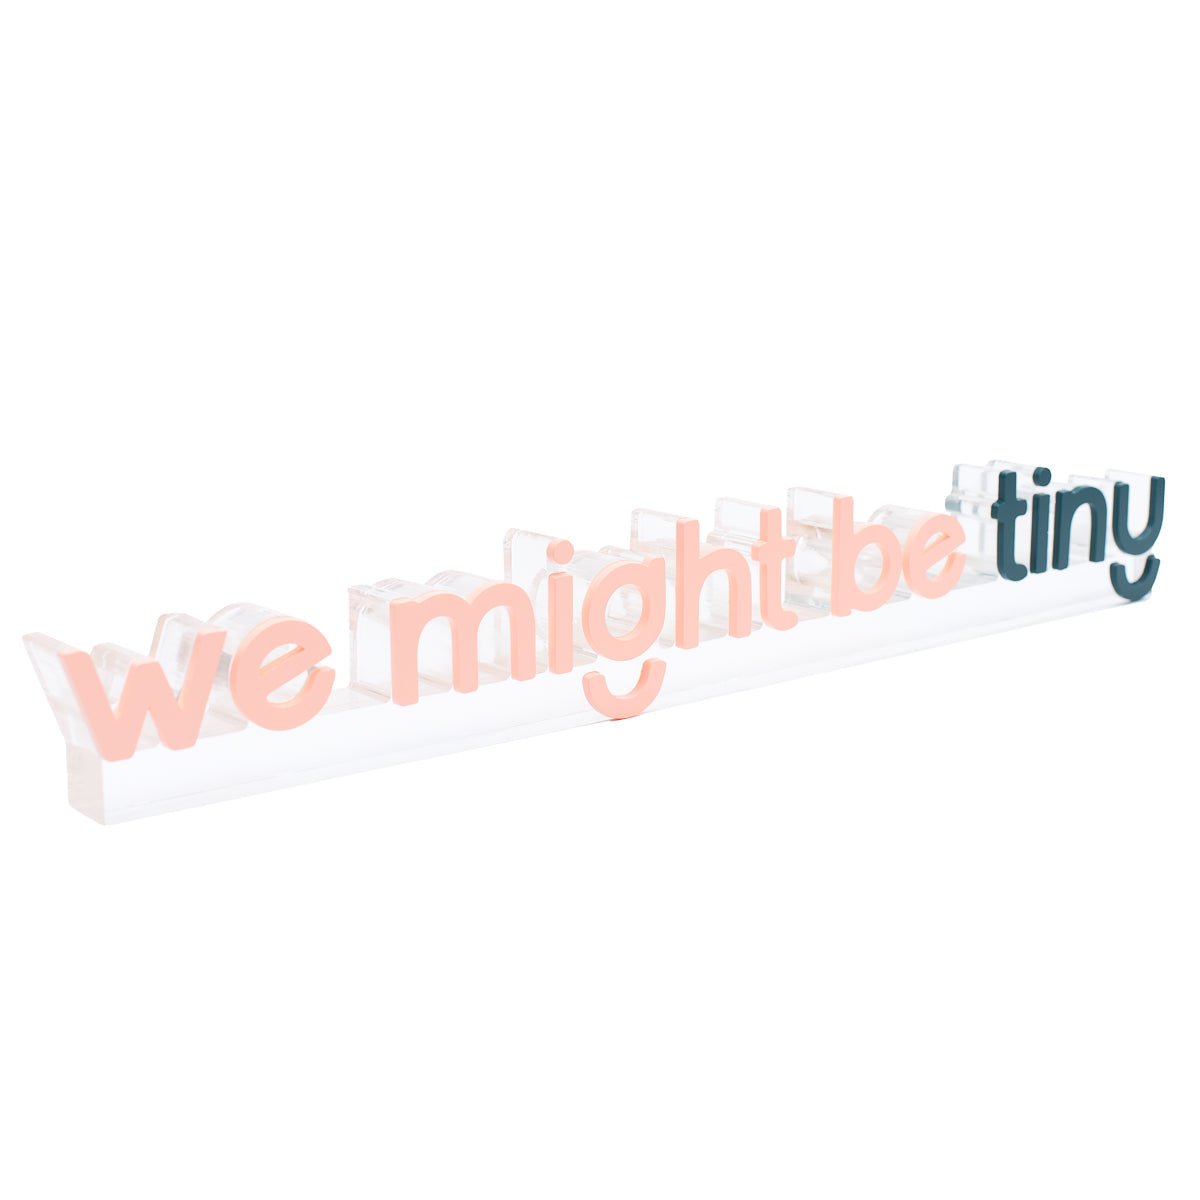 We Might Be Tiny - Acrylic Branded Retail Signage (angled)